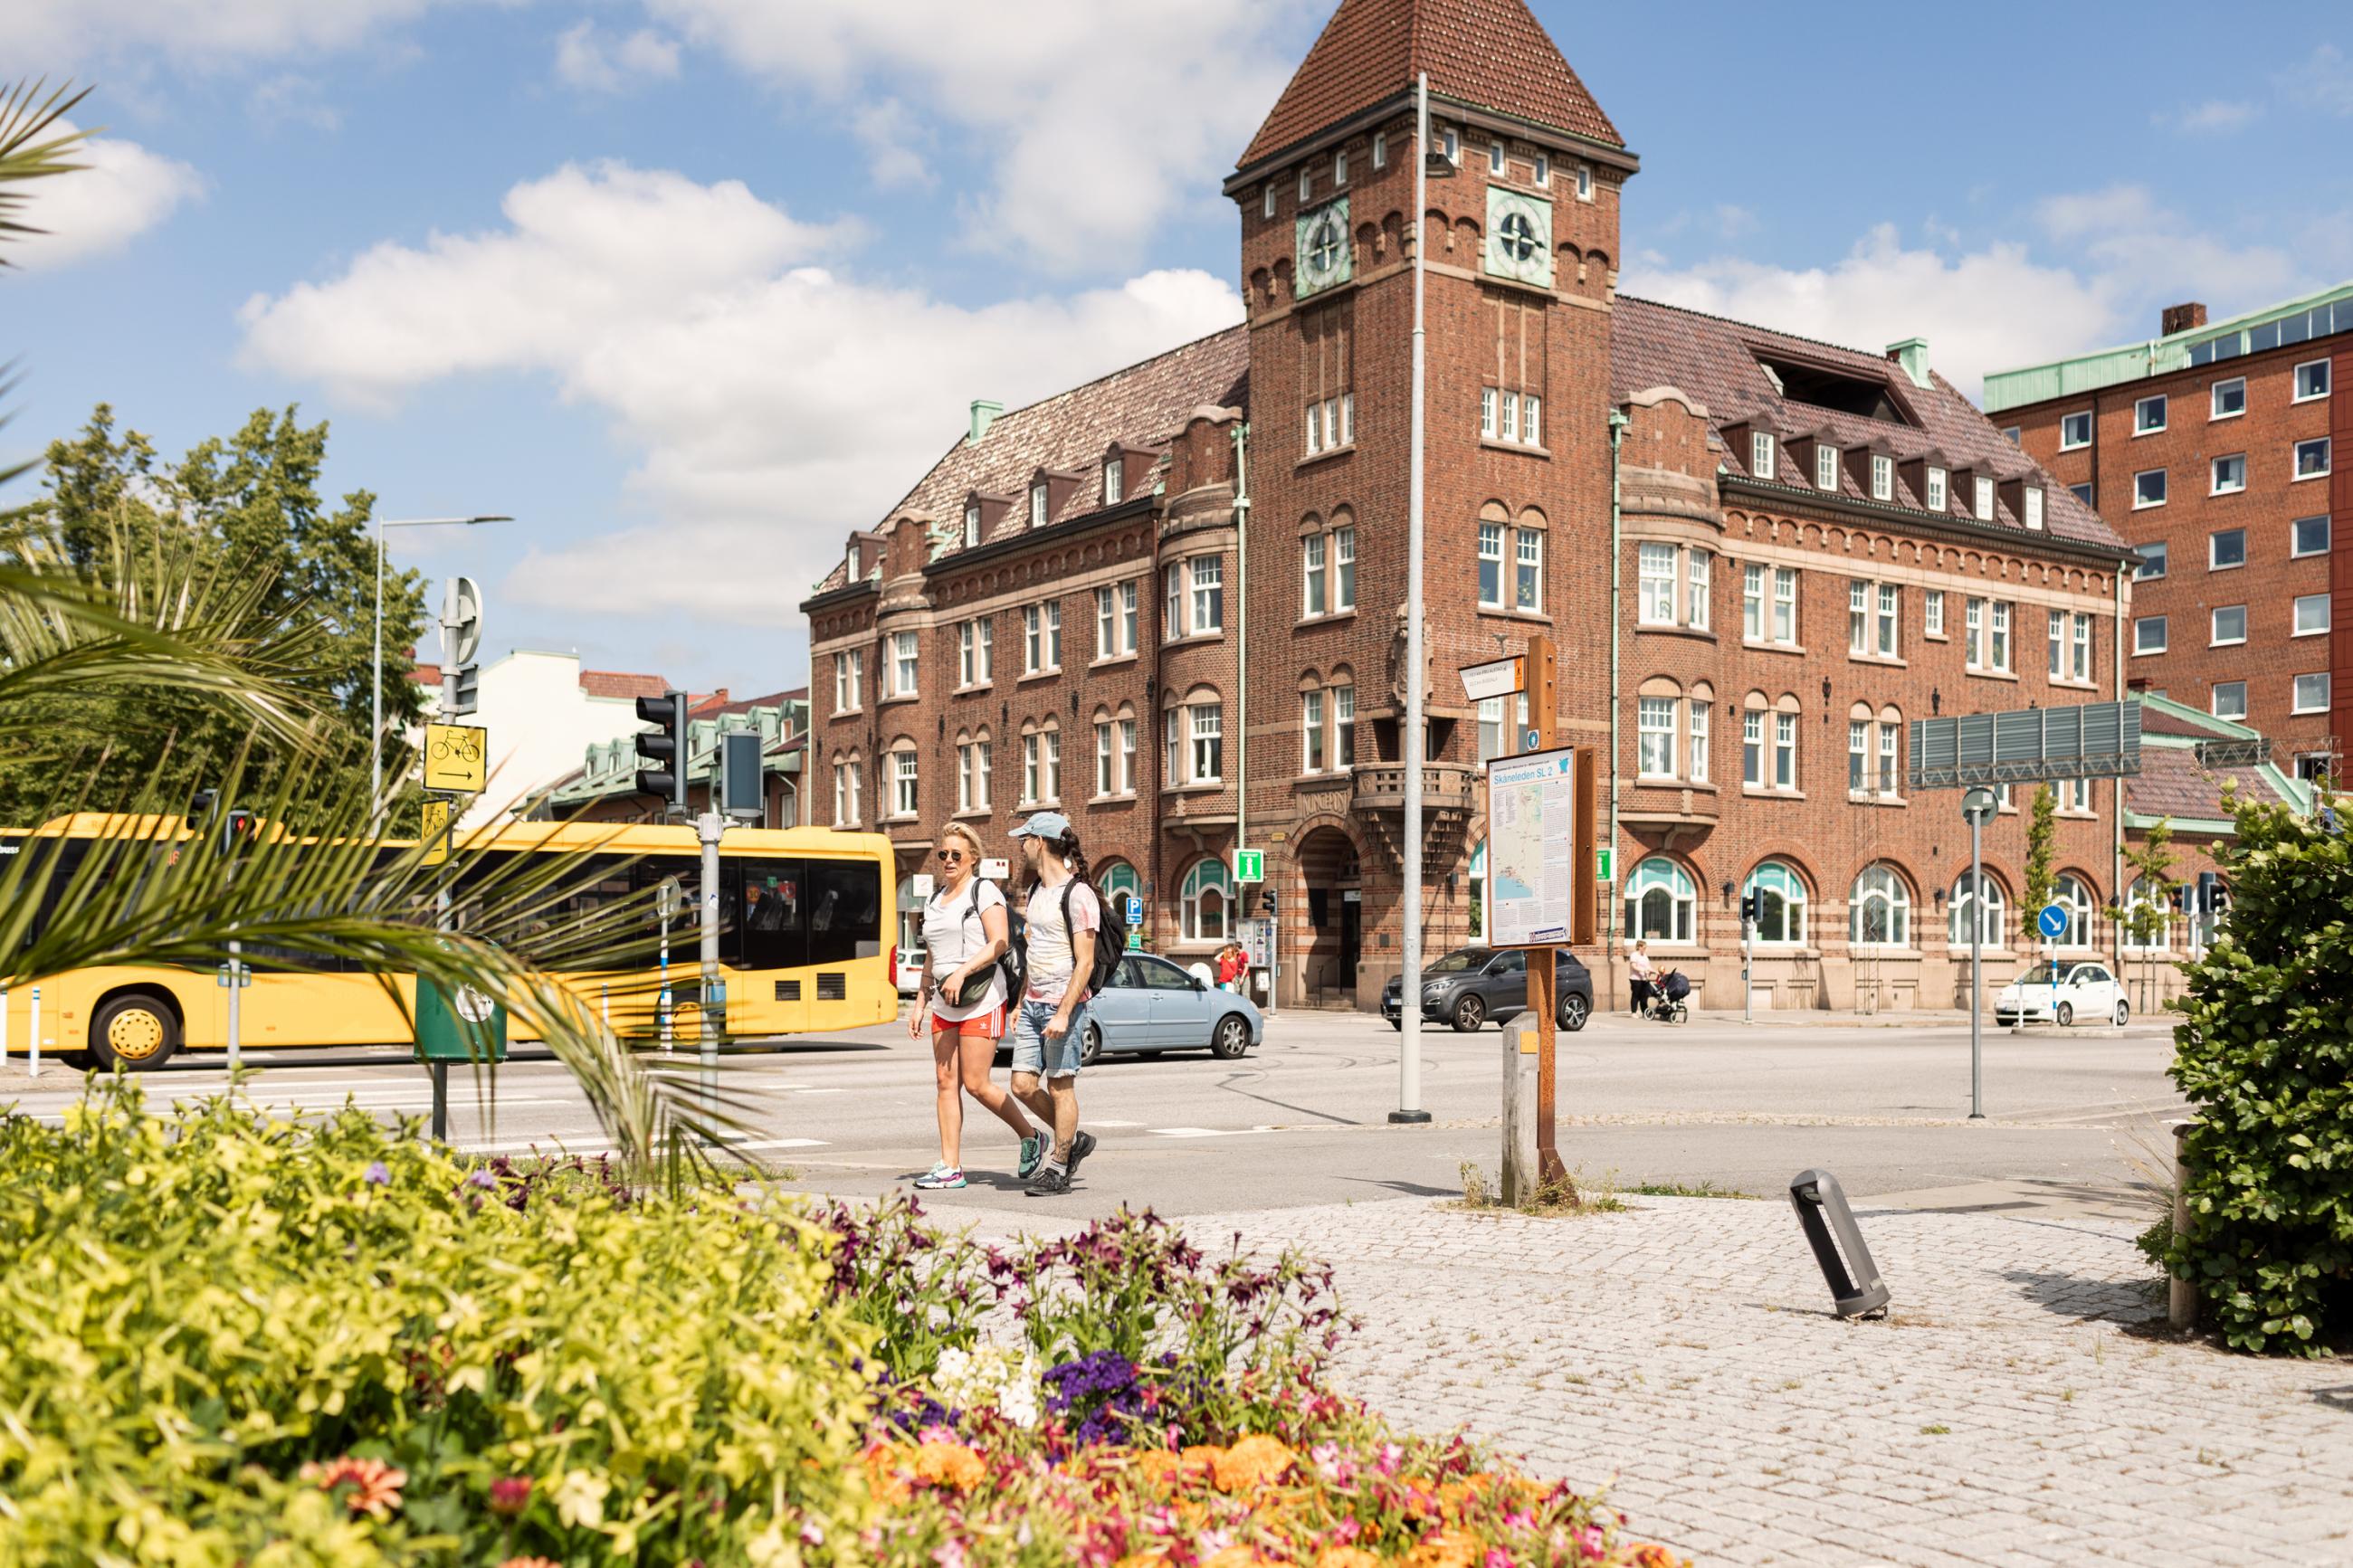 A sunny day in the center of Trelleborg. Buses, cars and people are passing by.